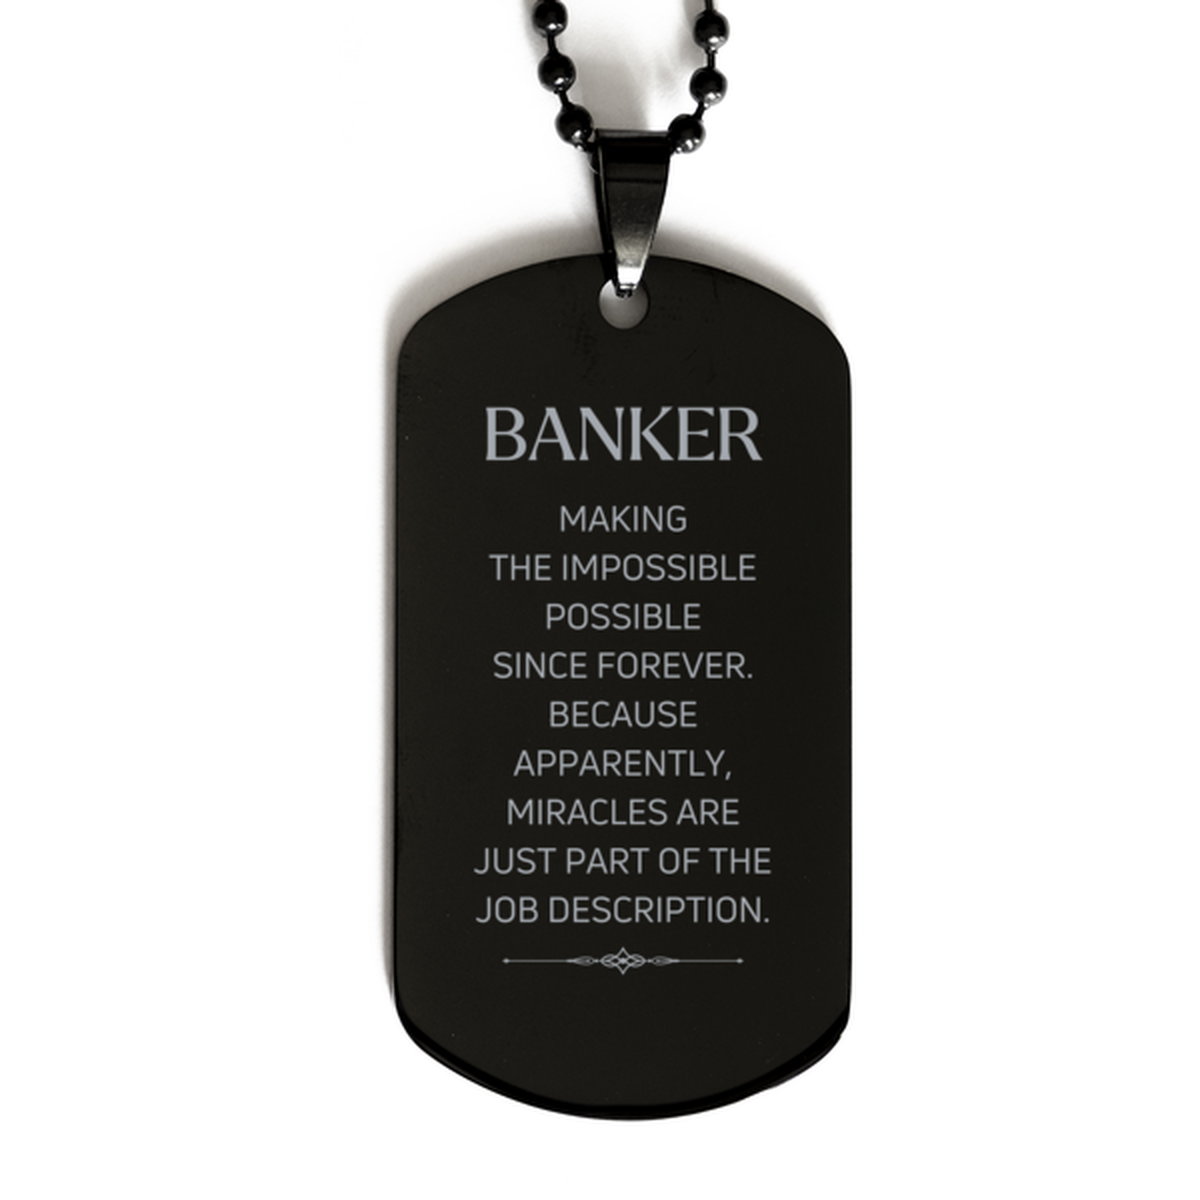 Funny Banker Gifts, Miracles are just part of the job description, Inspirational Birthday Black Dog Tag For Banker, Men, Women, Coworkers, Friends, Boss